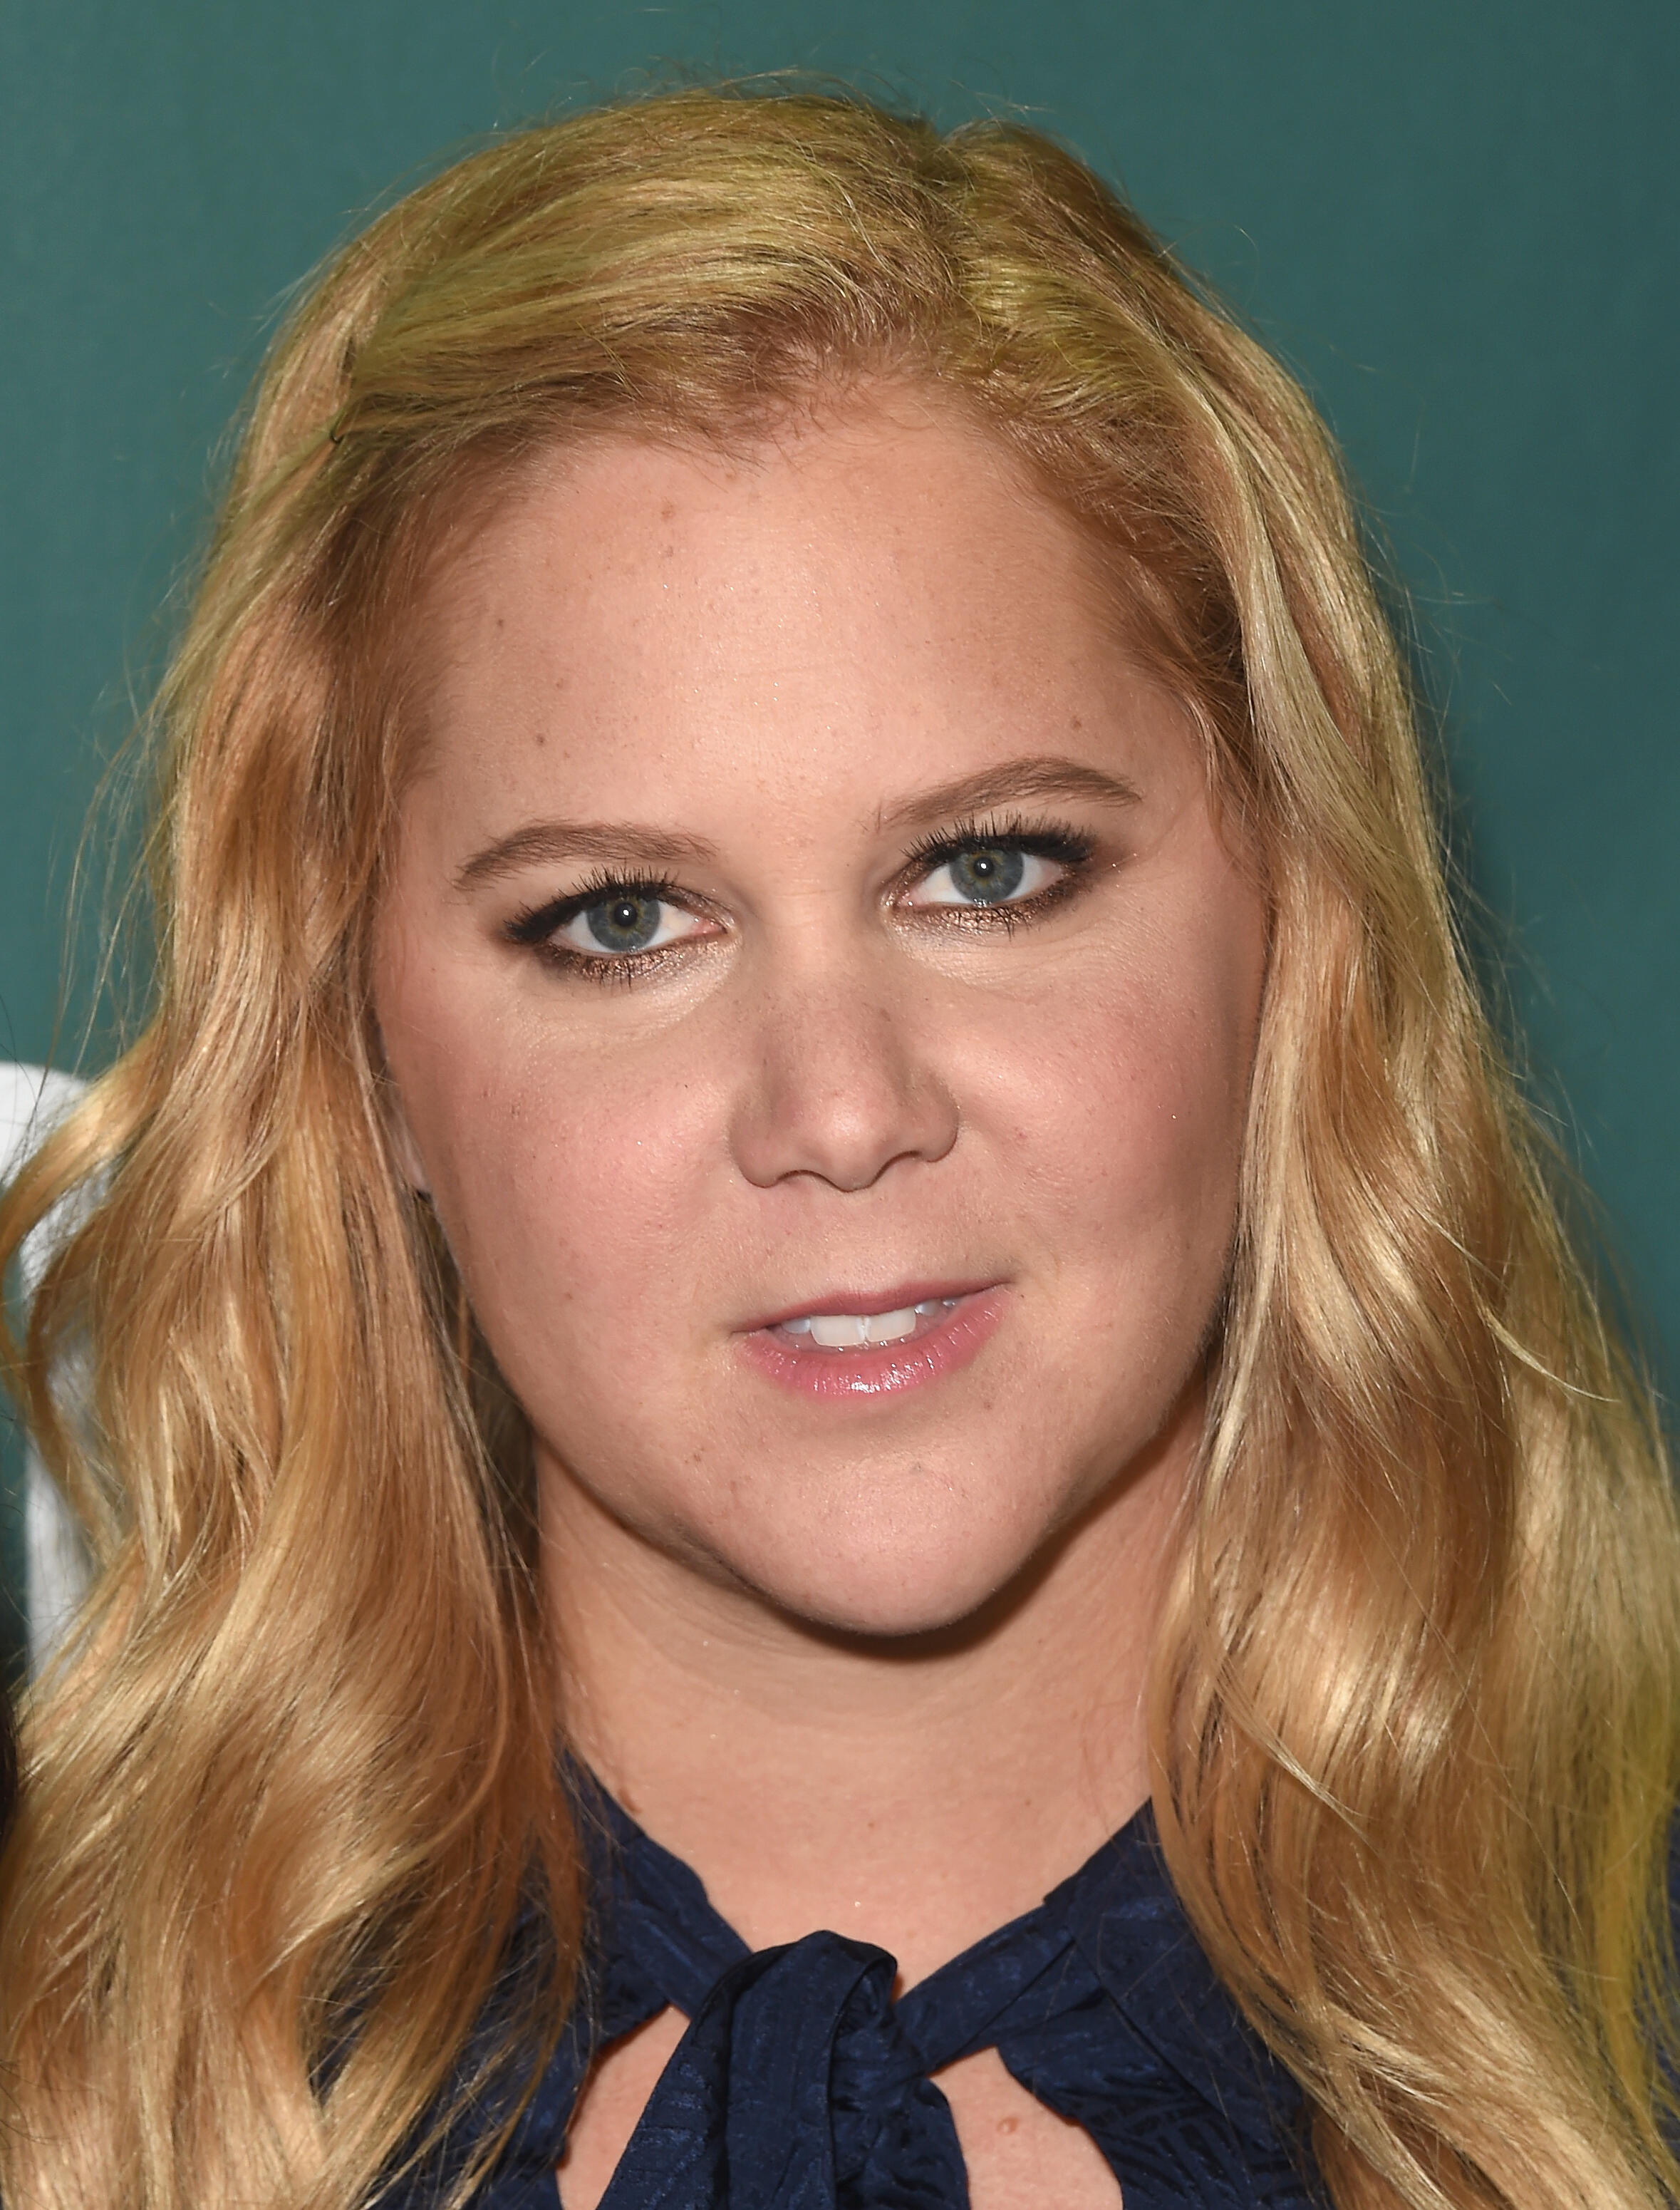 Amy Schumer has benefit Show for Charlottesville | Tiffany | Kiss 108